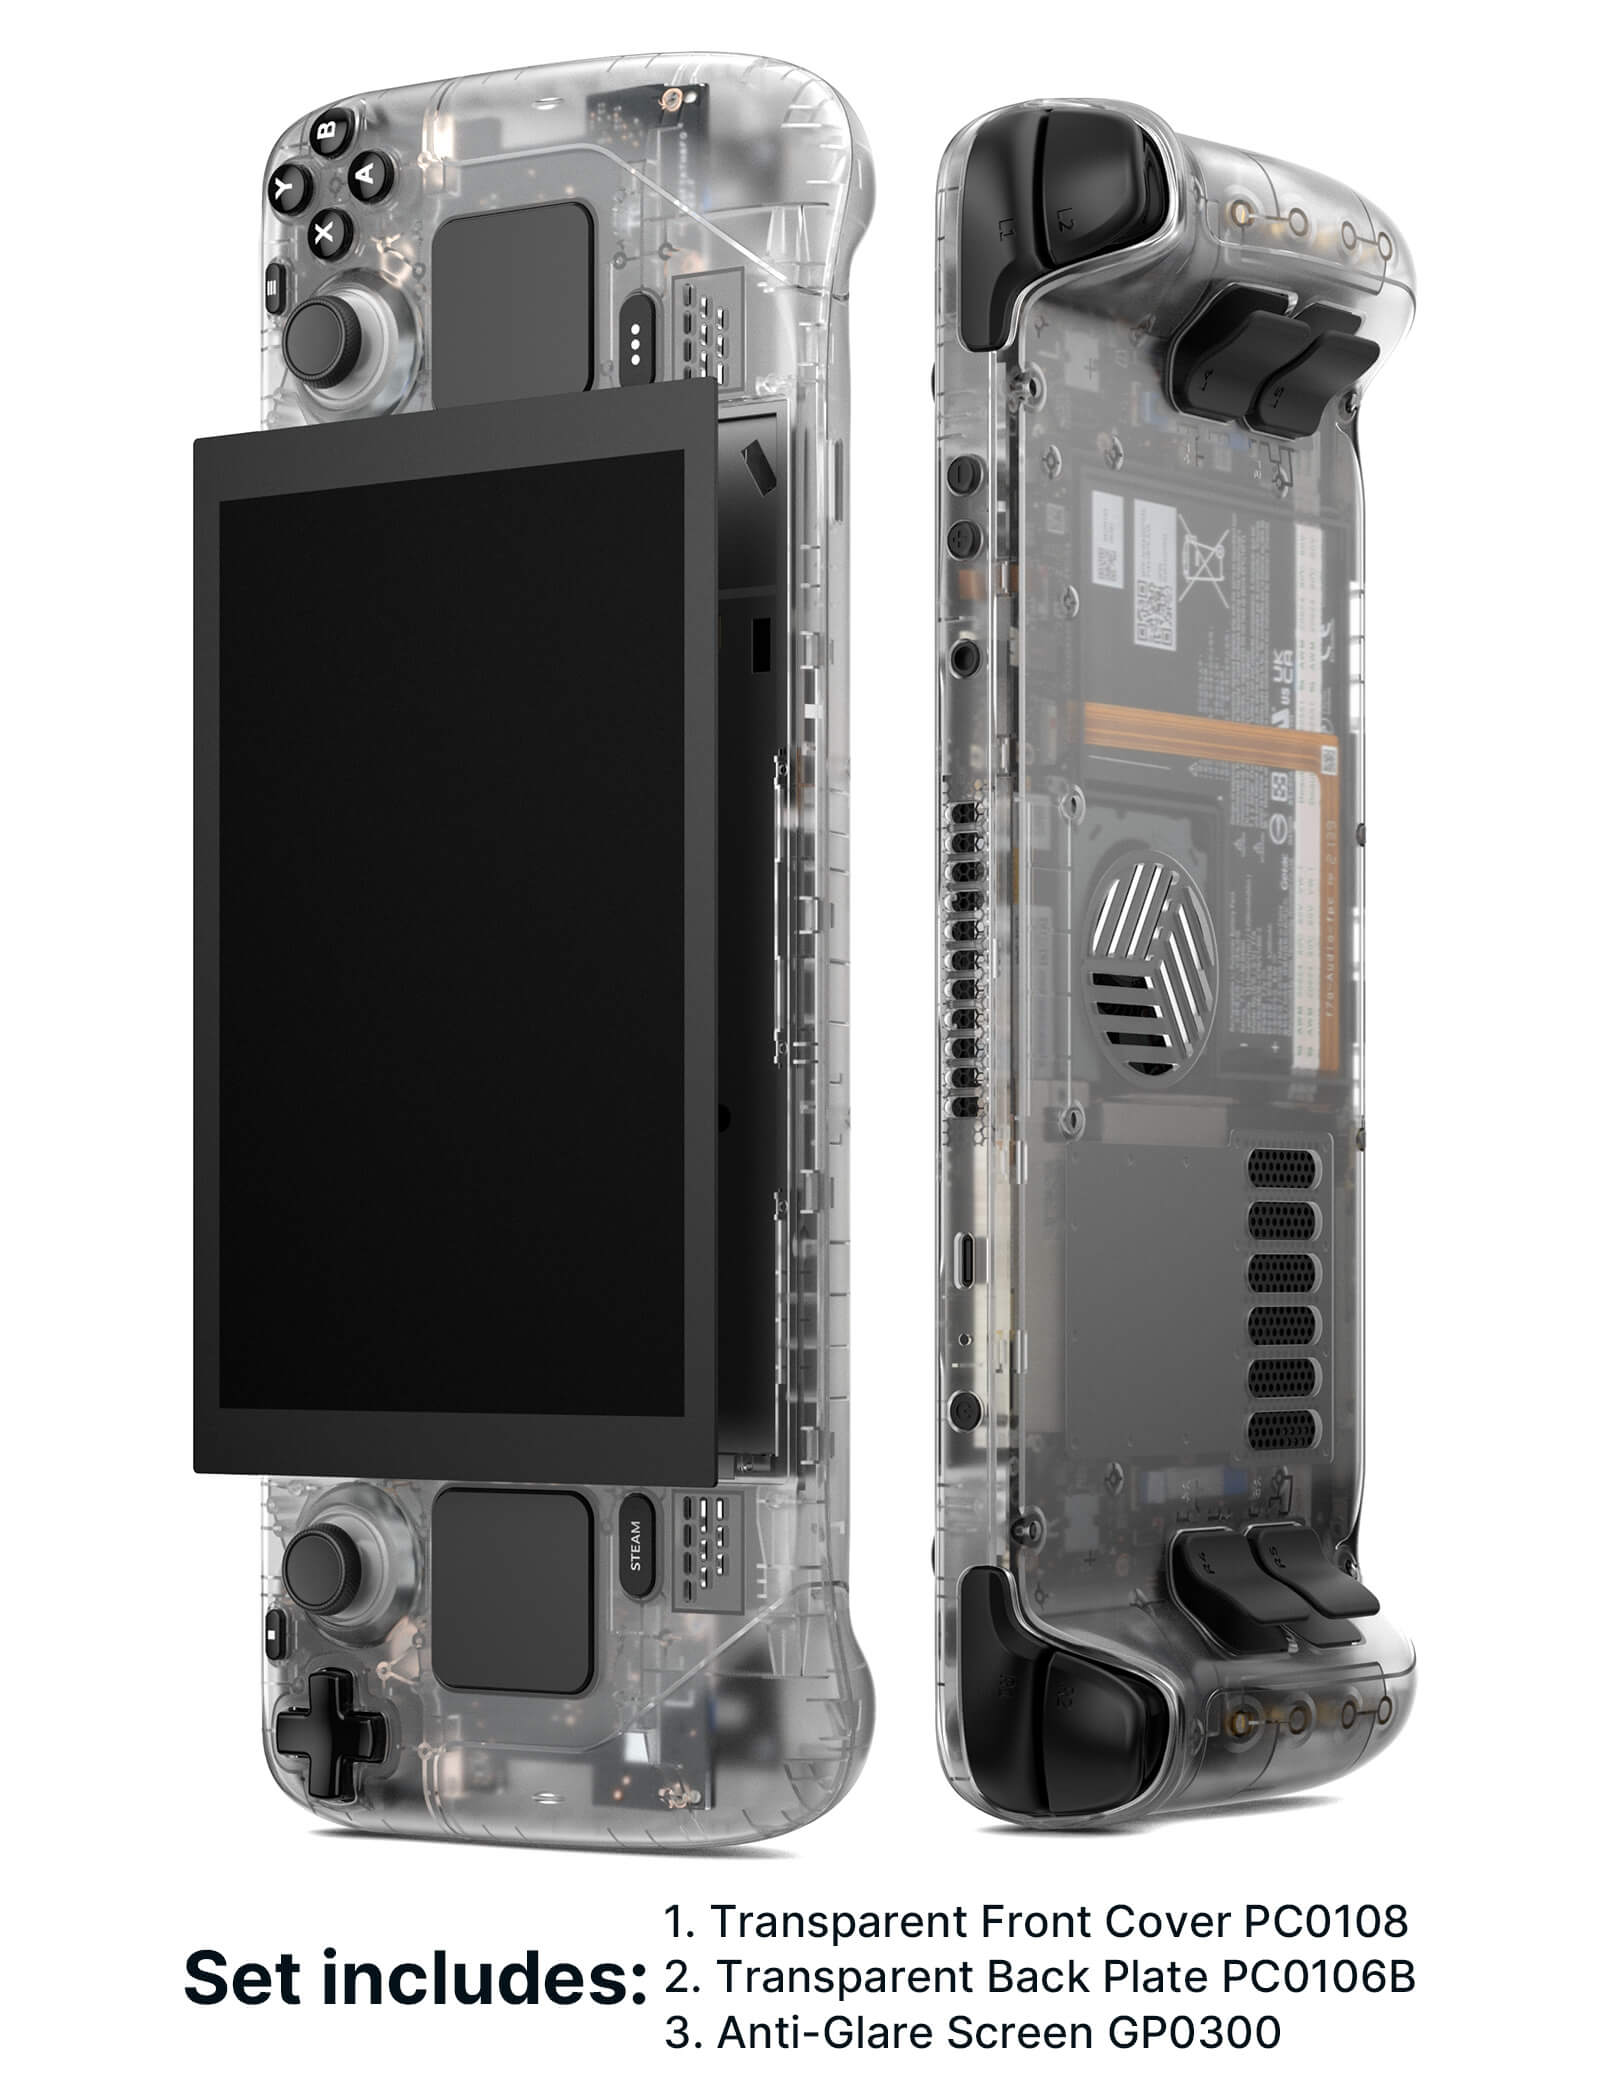 #style(not for oled)_front cover & back plate vents & anti-glare screen